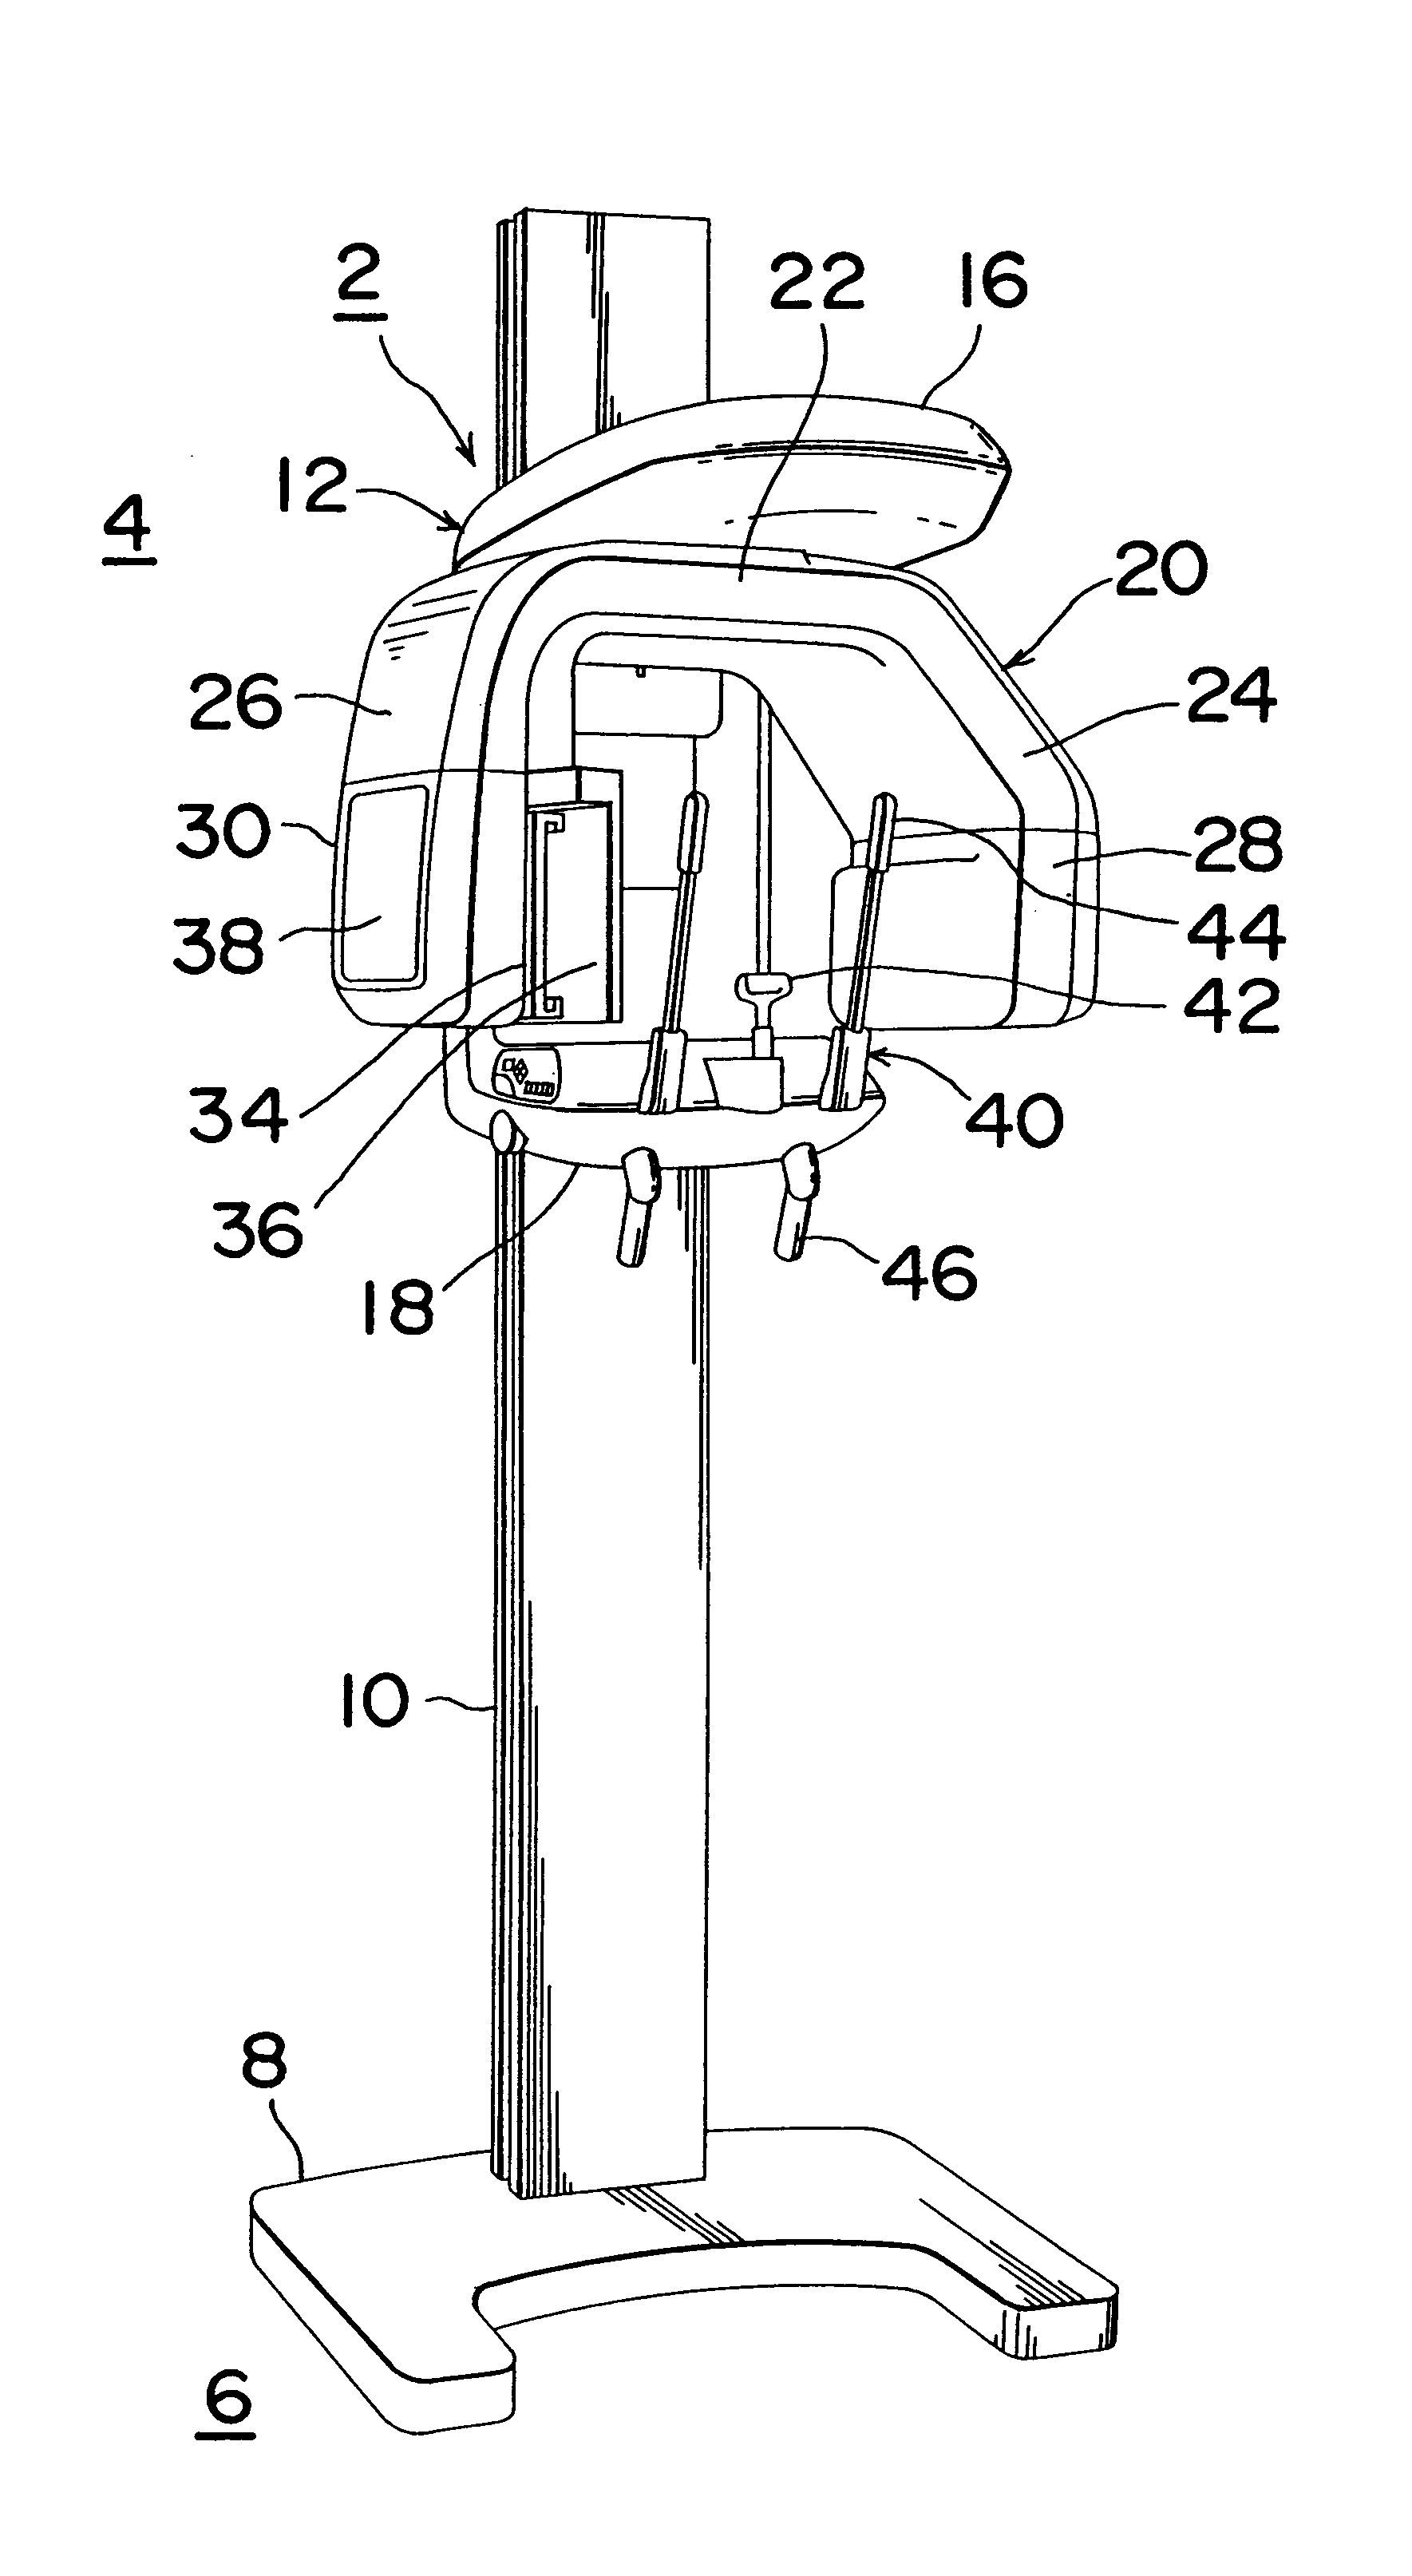 X-ray apparatus with improved patient access